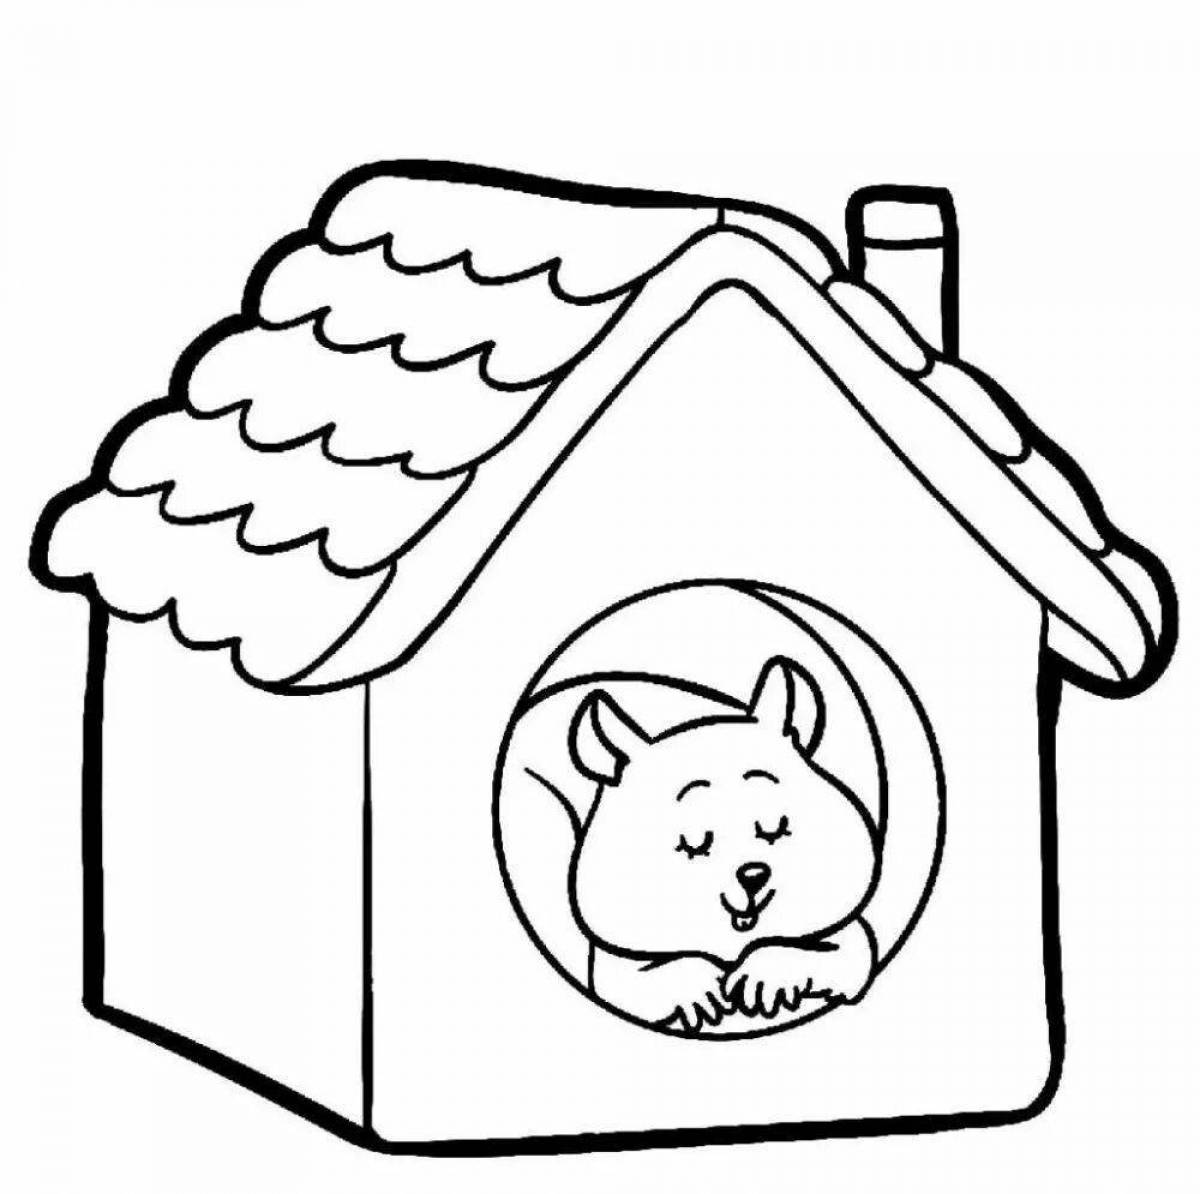 Colouring funny doghouse